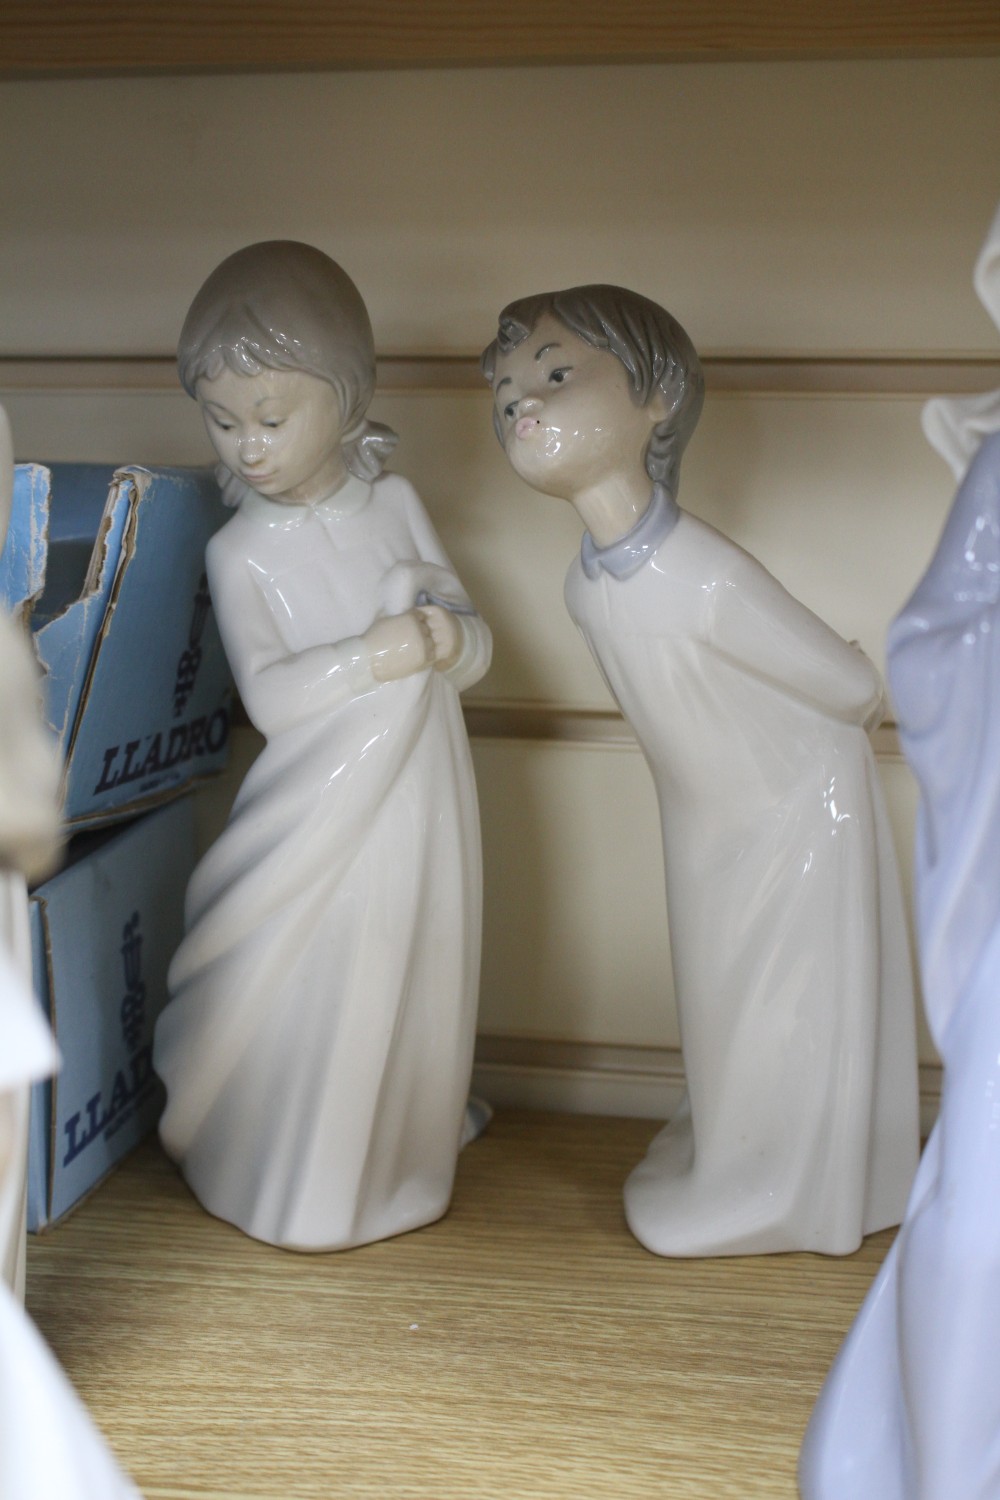 Four Lladro figures of children in their nightdresses, largest 24cm, three similar Nao figures, largest 27cm and a Royal Doulton figure